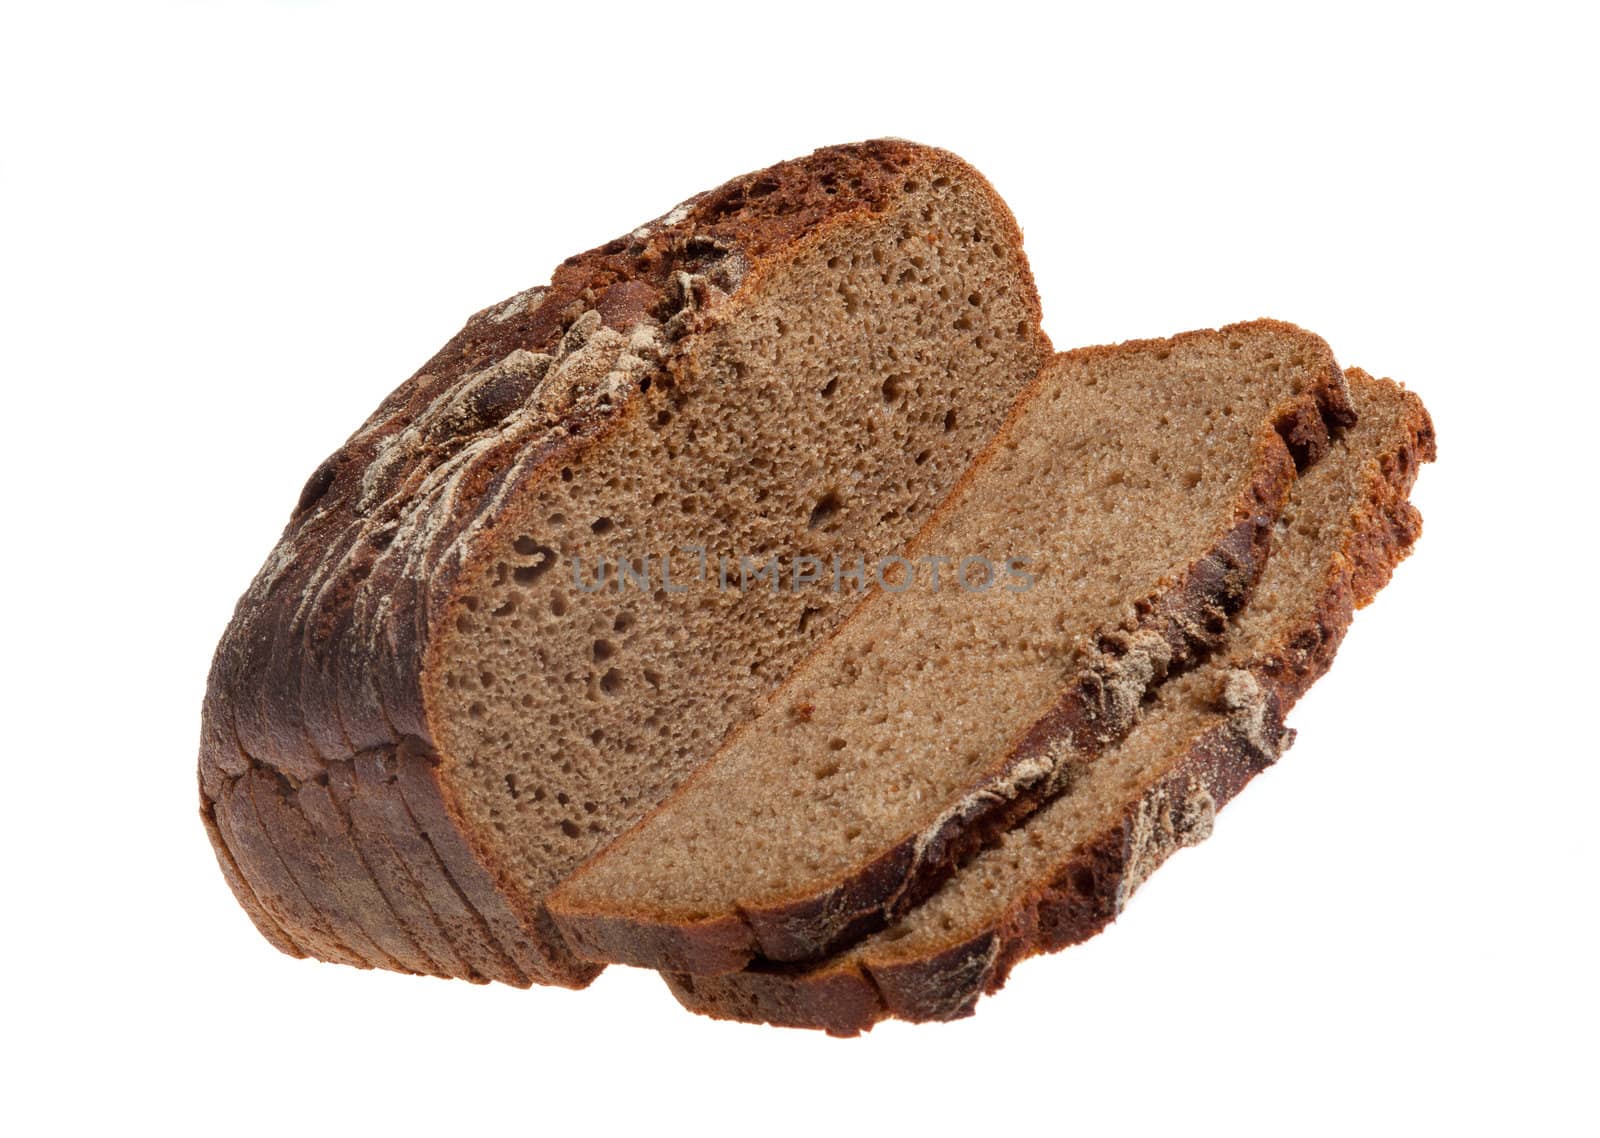 bread loaf, photo on the white background 